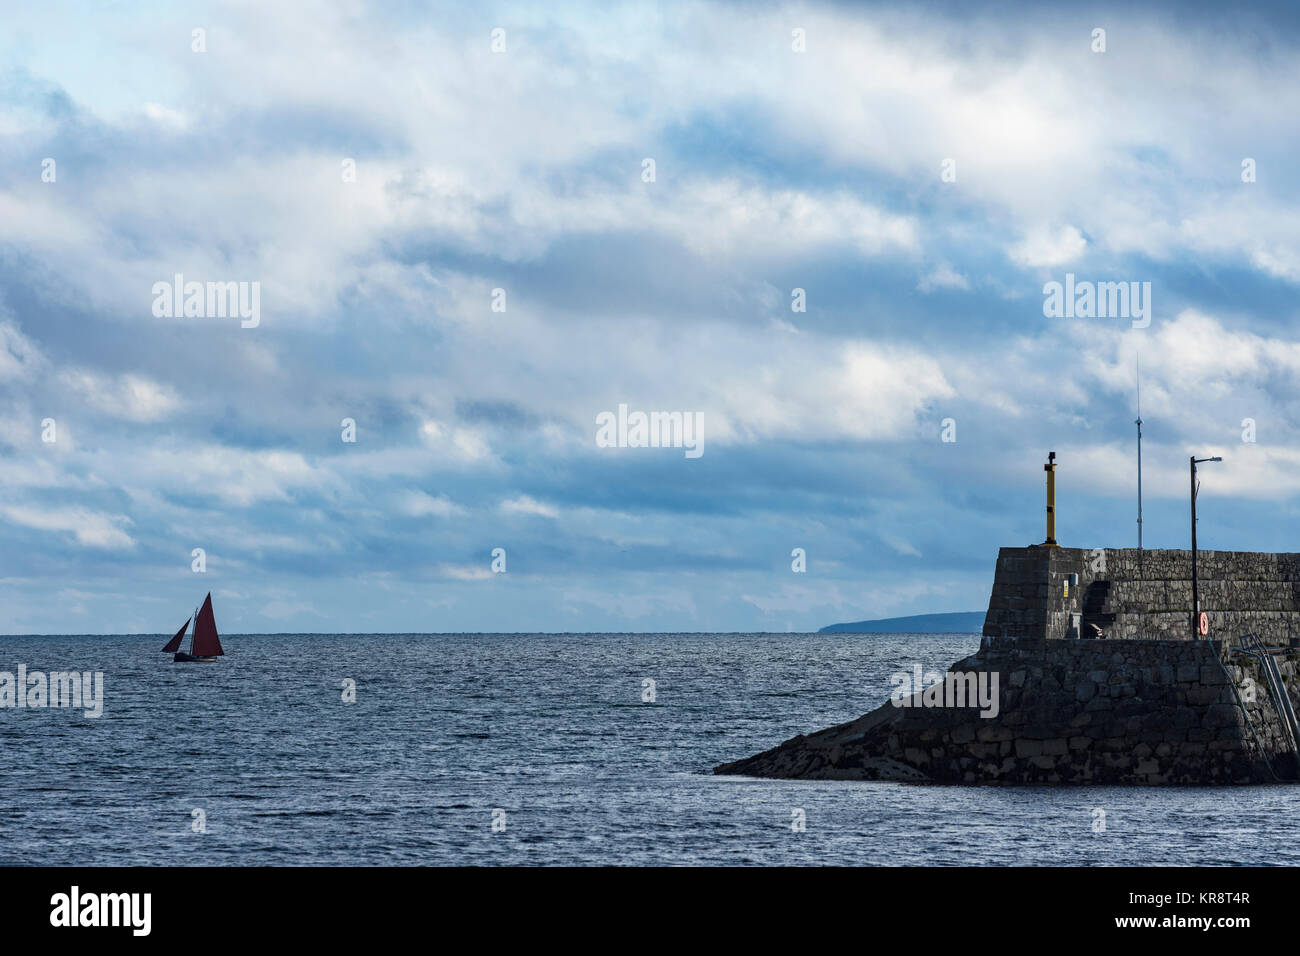 Ireland, Galway County, Spiddal, Hooker sailboat and pier Stock Photo